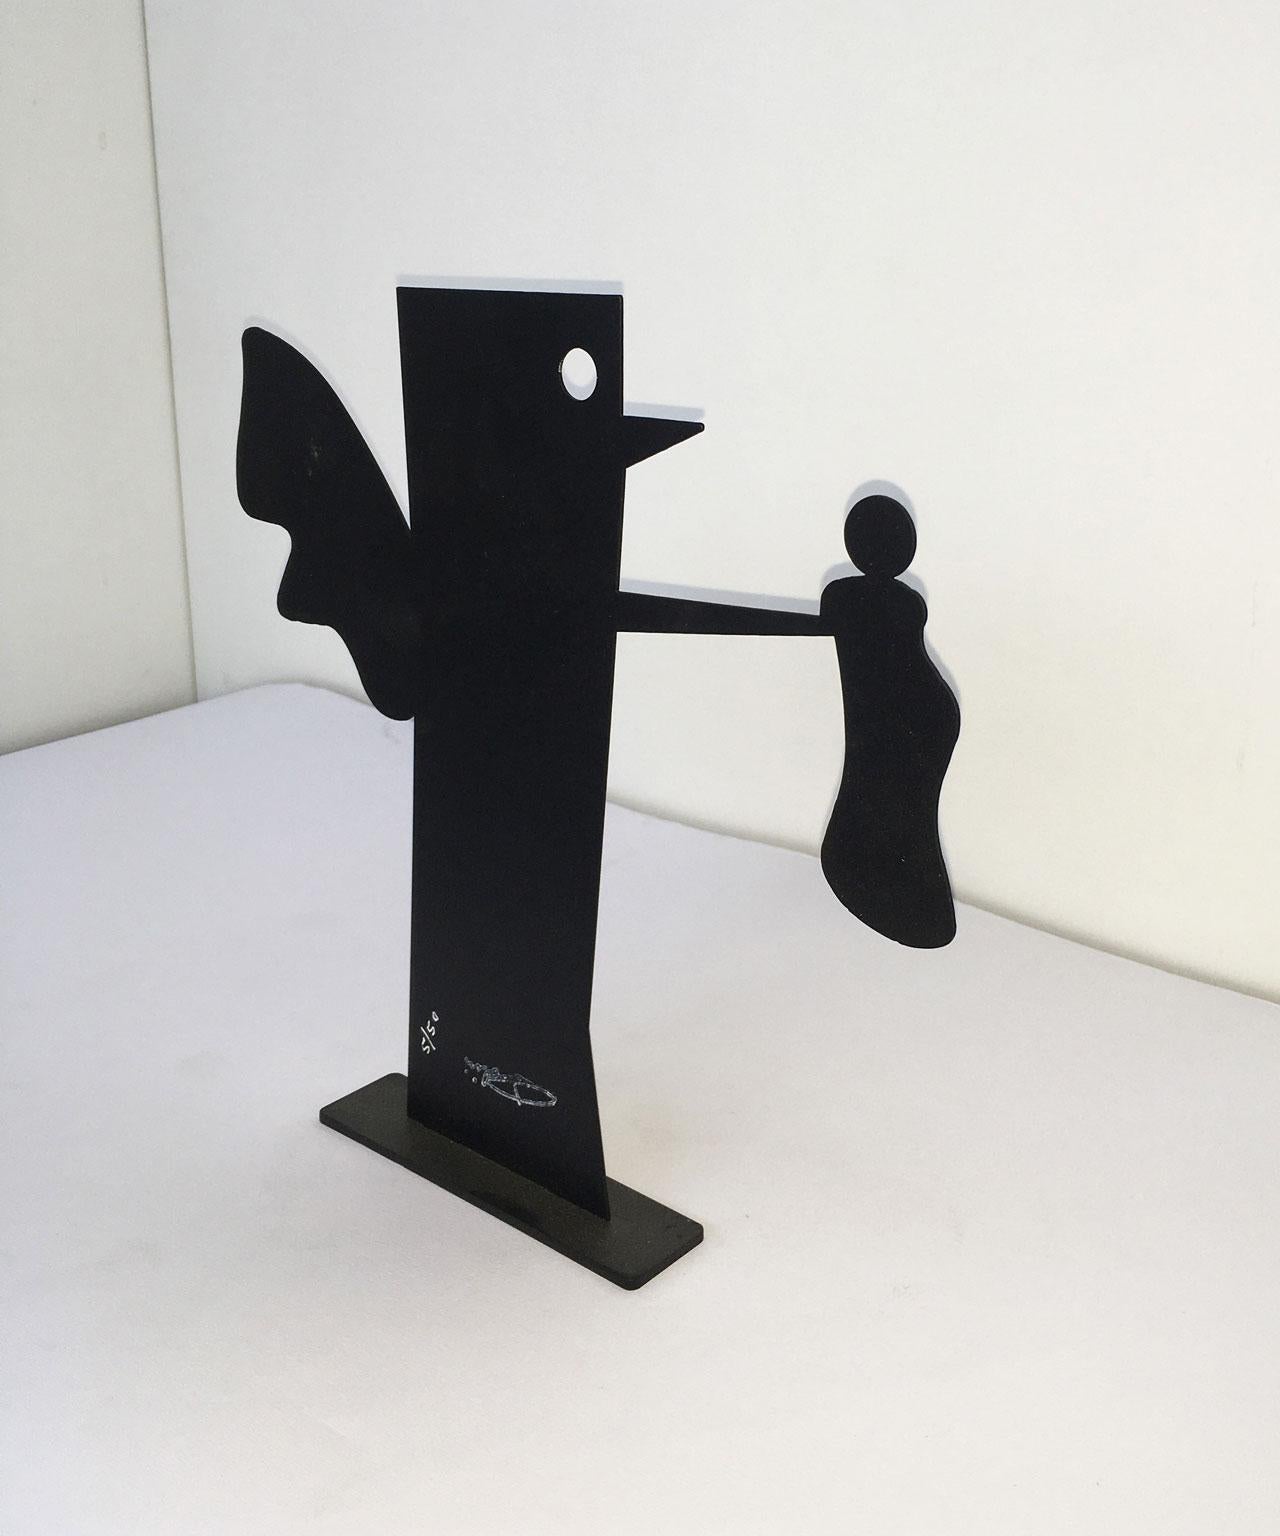 Italy 1980 Riccardo Dalisi Black Metal Painted Sculpture Caffellatte For Sale 8